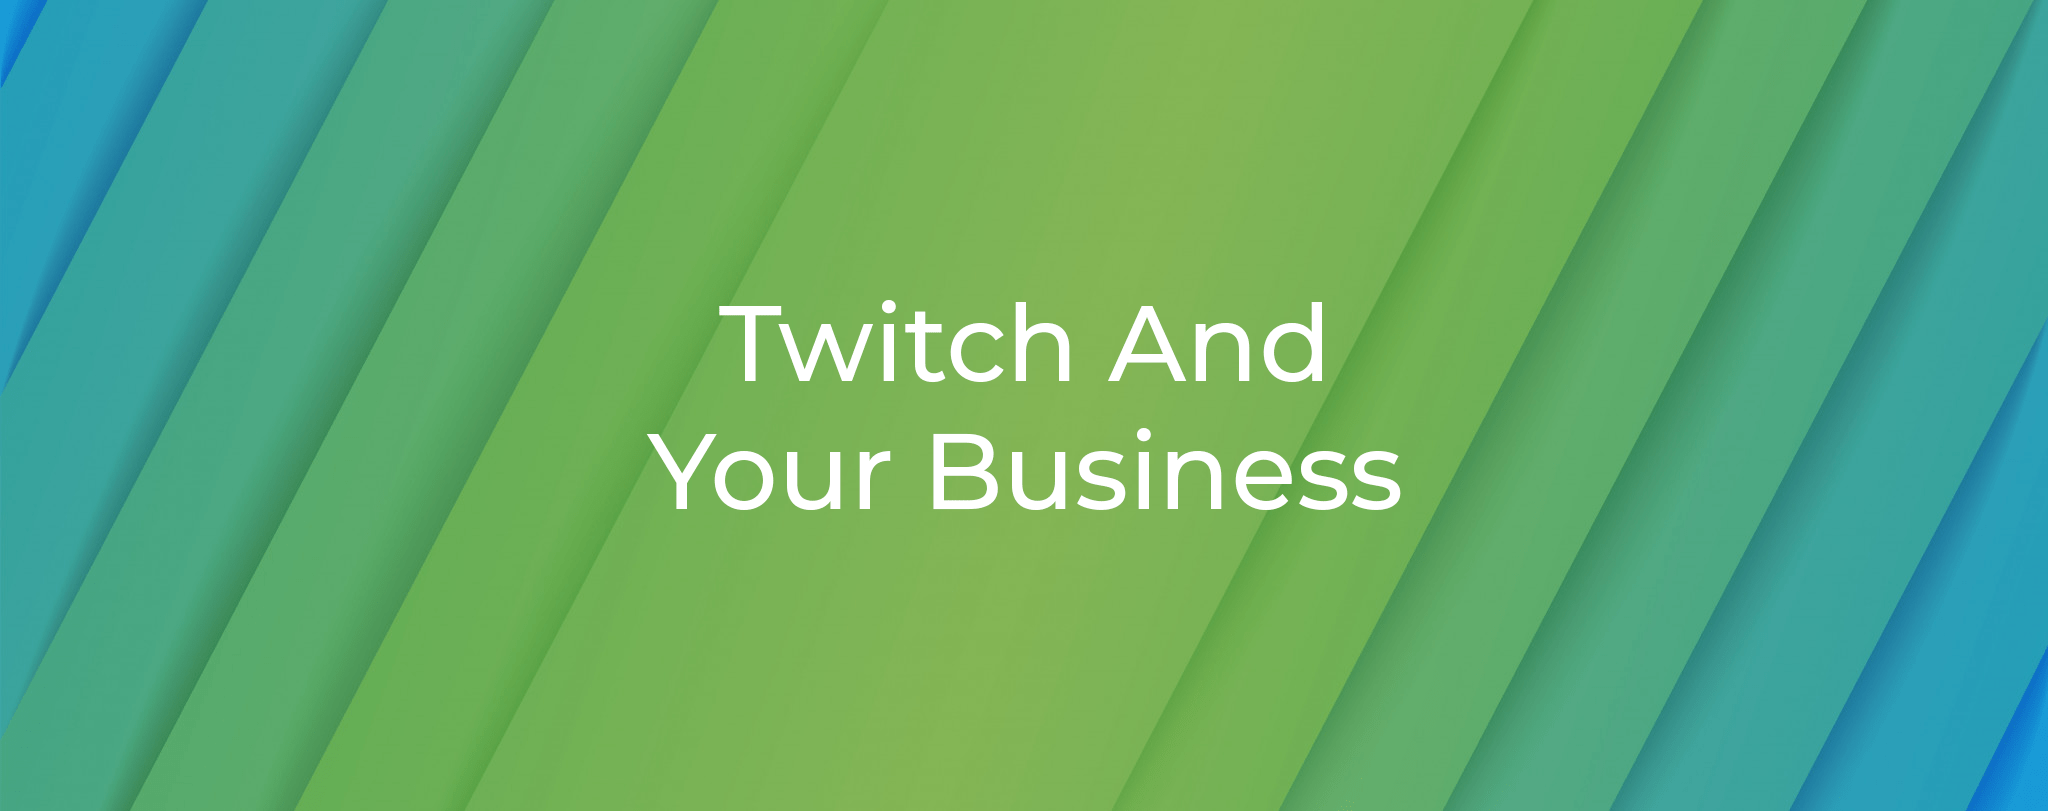 Twitch And Your Business